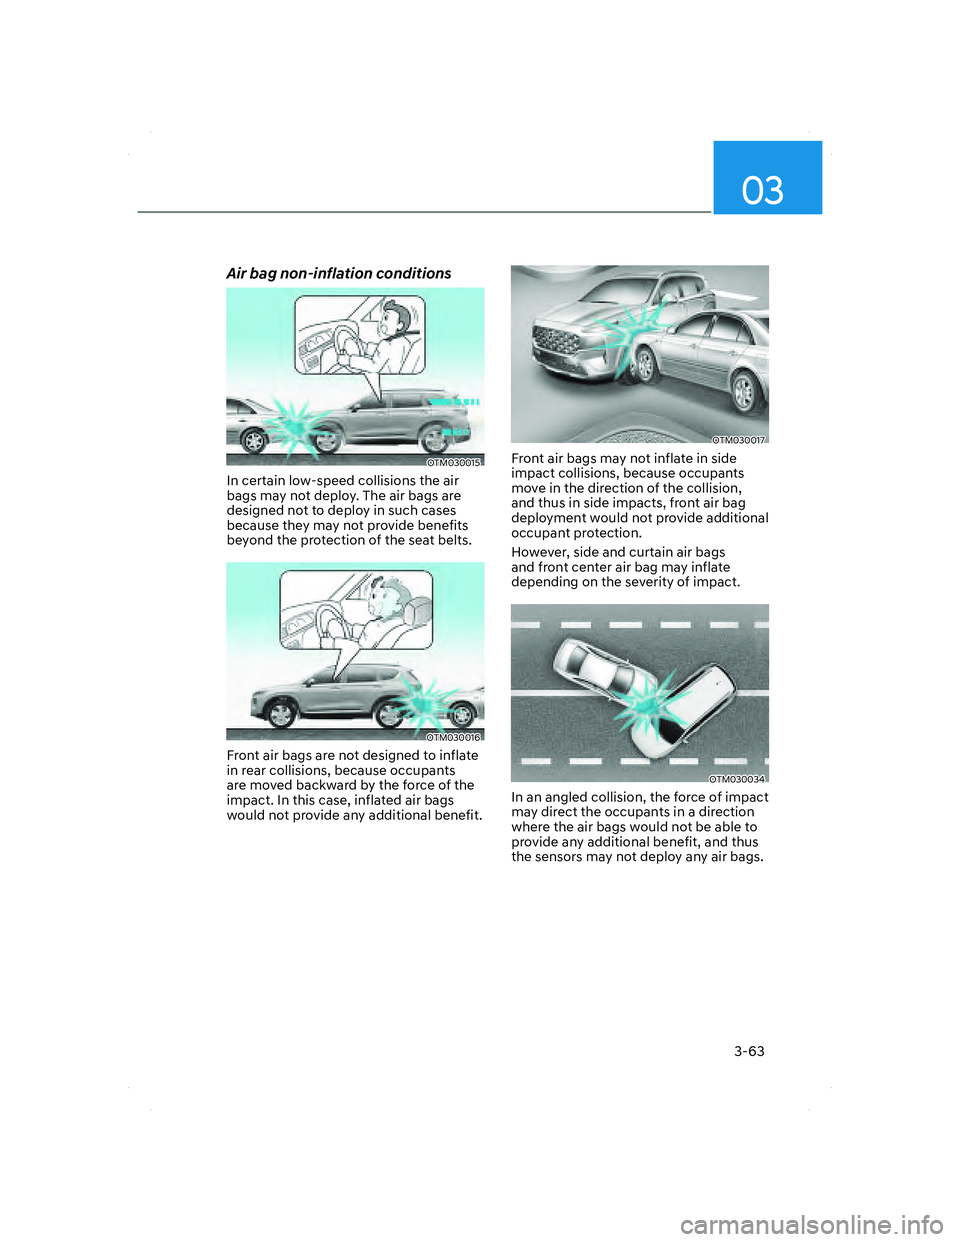 HYUNDAI SANTA FE 2022 Owners Manual 03
3-63
Air bag non-inflation conditions
OTM030015OTM030015
In certain low-speed collisions the air 
bags may not deploy. The air bags are 
designed not to deploy in such cases 
because they may not p